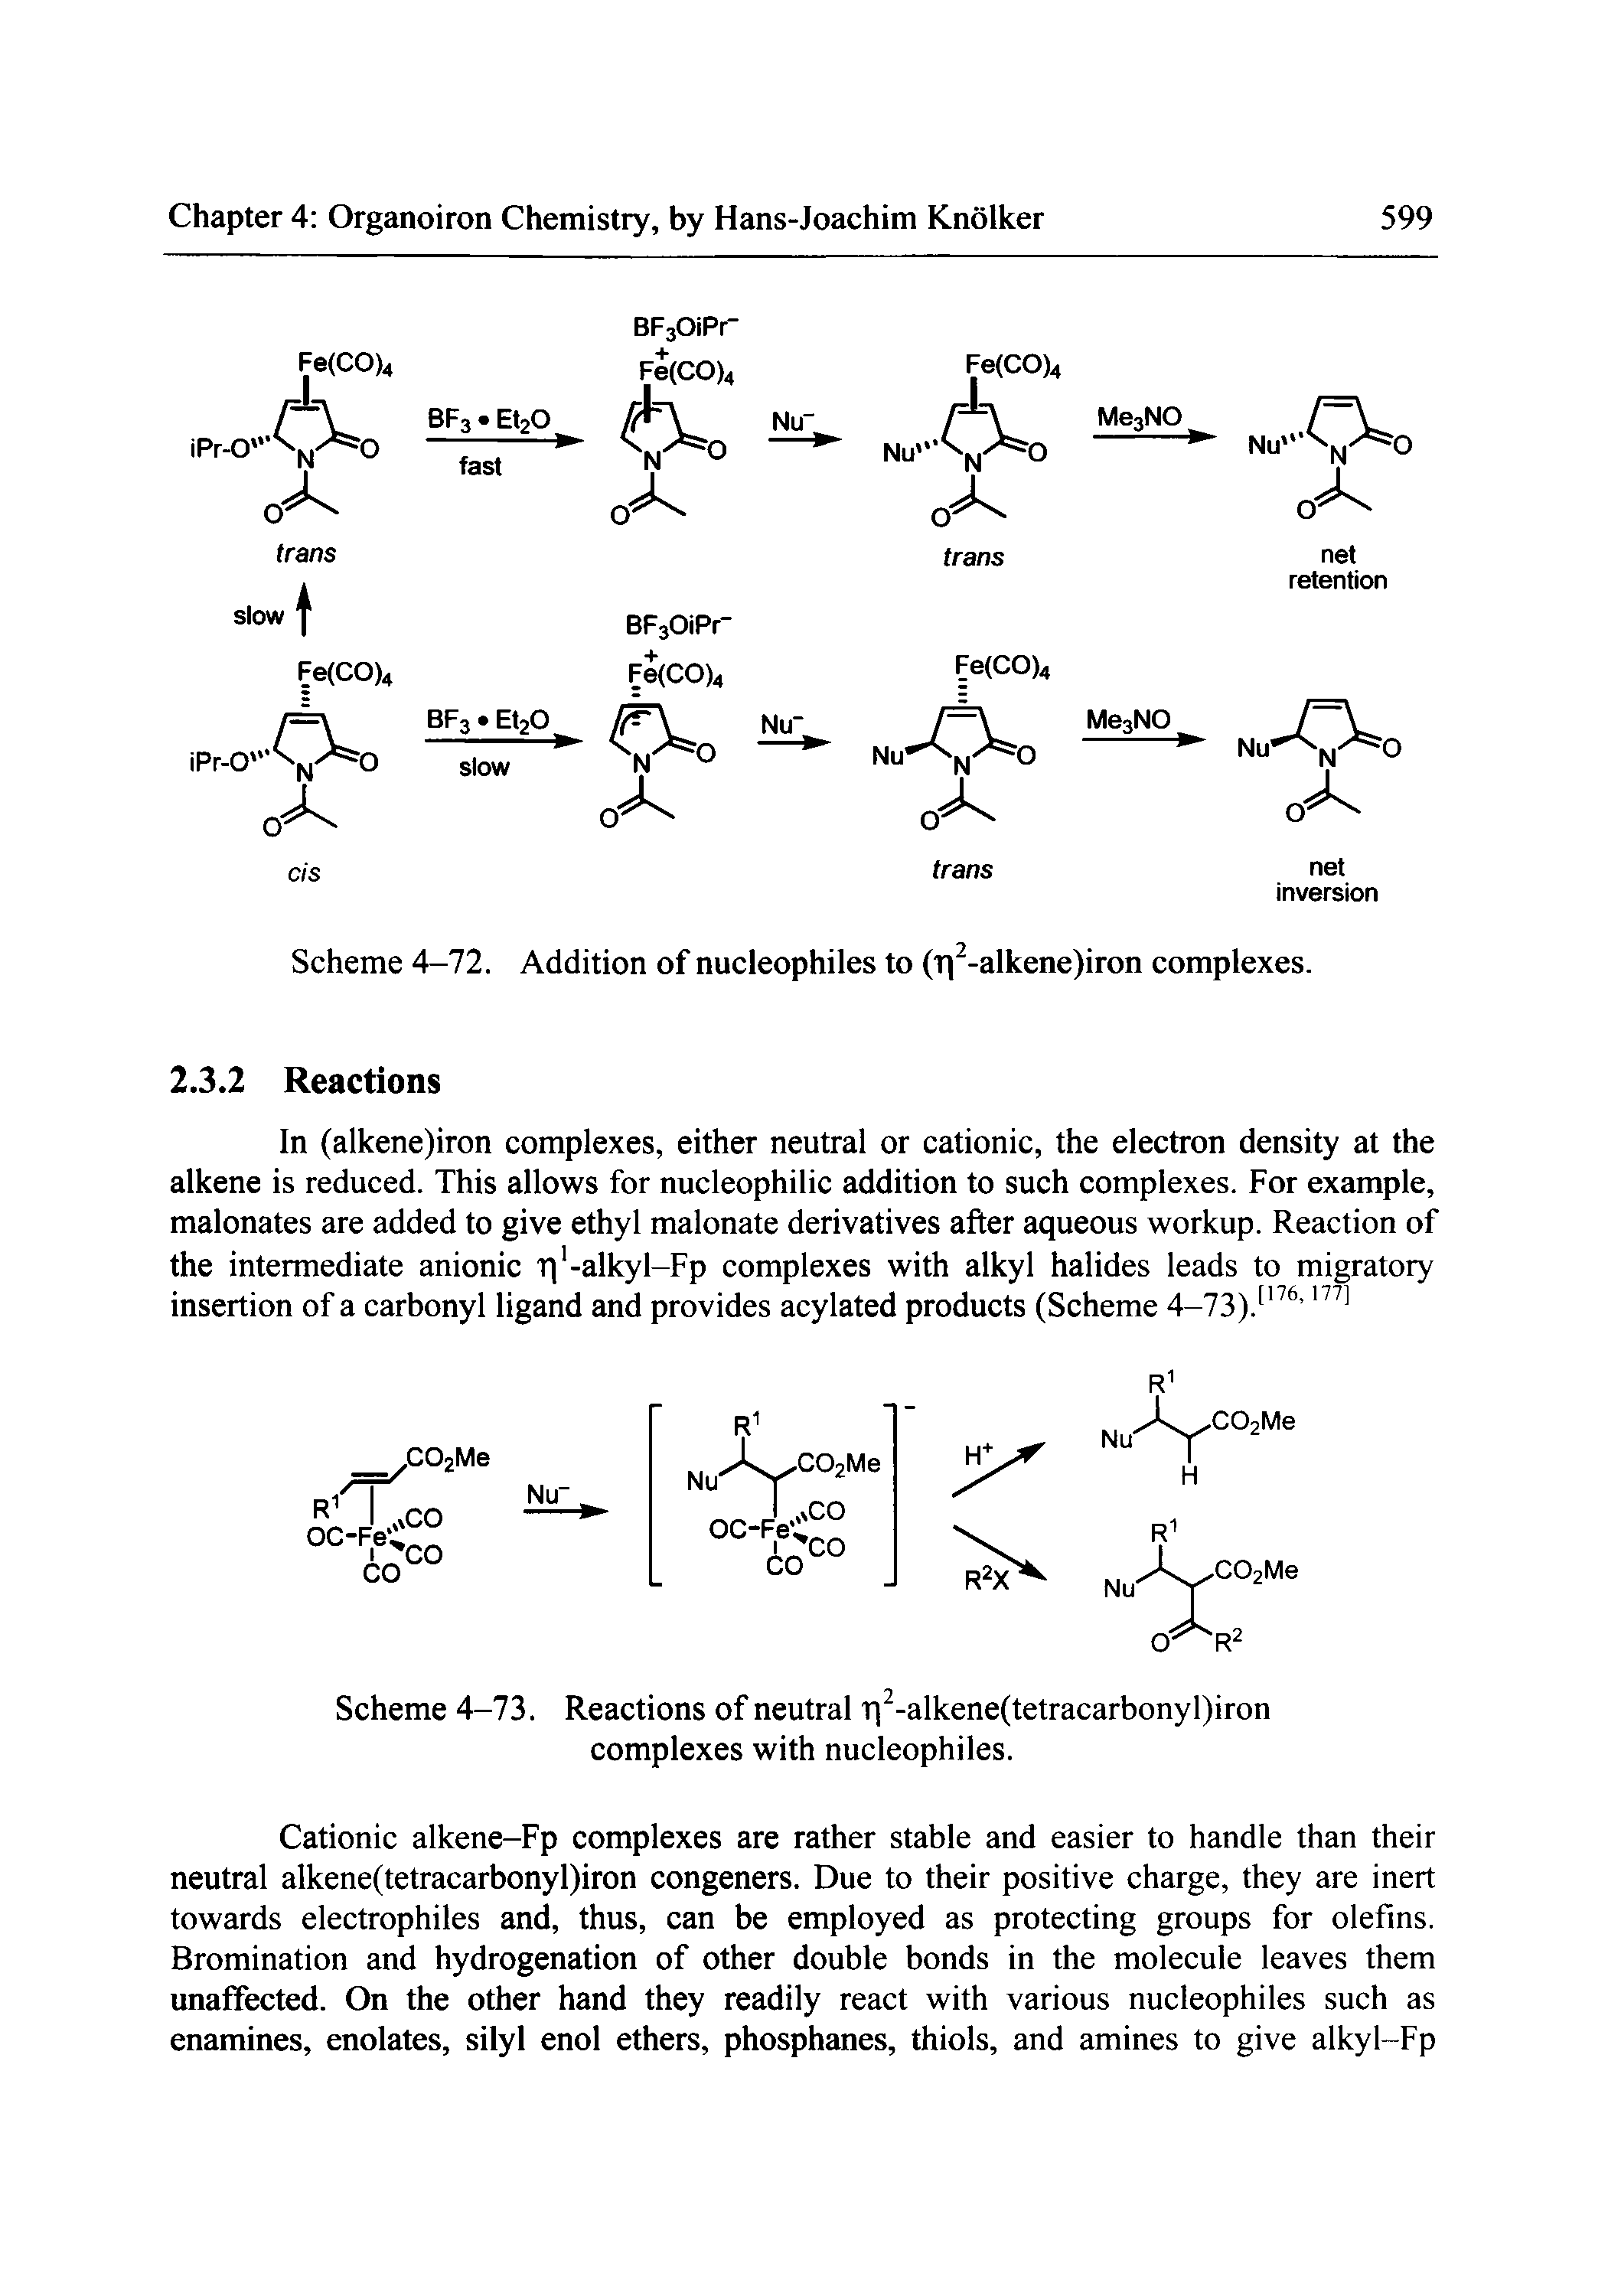 Scheme 4-73. Reactions of neutral ri -alkene(tetracarbonyl)iron complexes with nucleophiles.